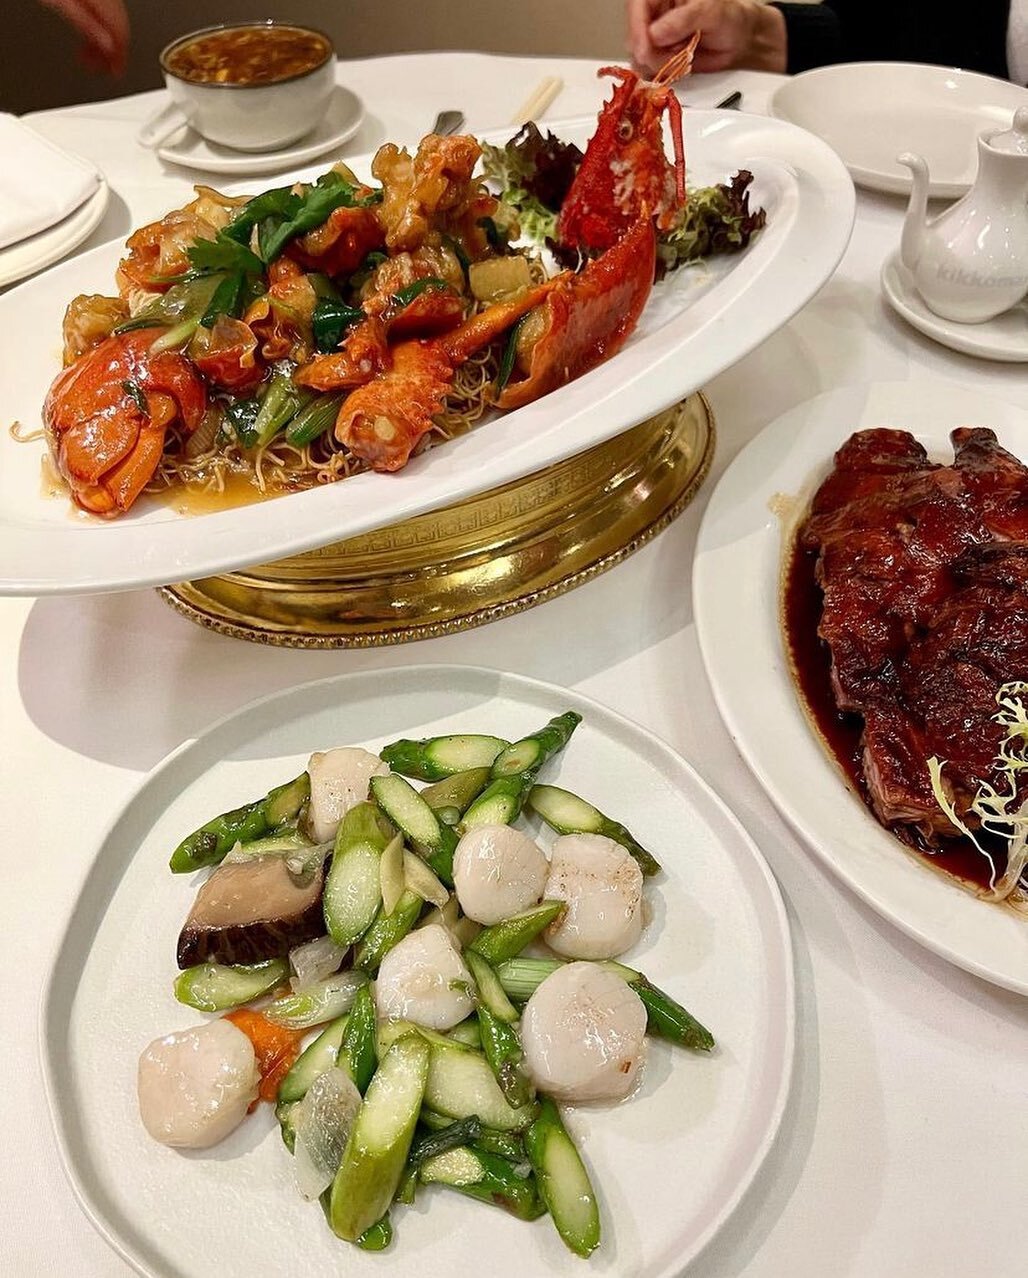 Delicious spread by one of our lovely customers!

Lobster Noodles 🦞 
Roast Duck 🦆 
Stir Fried Asparagus &amp; Scallops 🐚

Photo cr: judylyh

#chinesefood #cantonesefood #royalchina #londonfood #dinner #lunch #londoneats